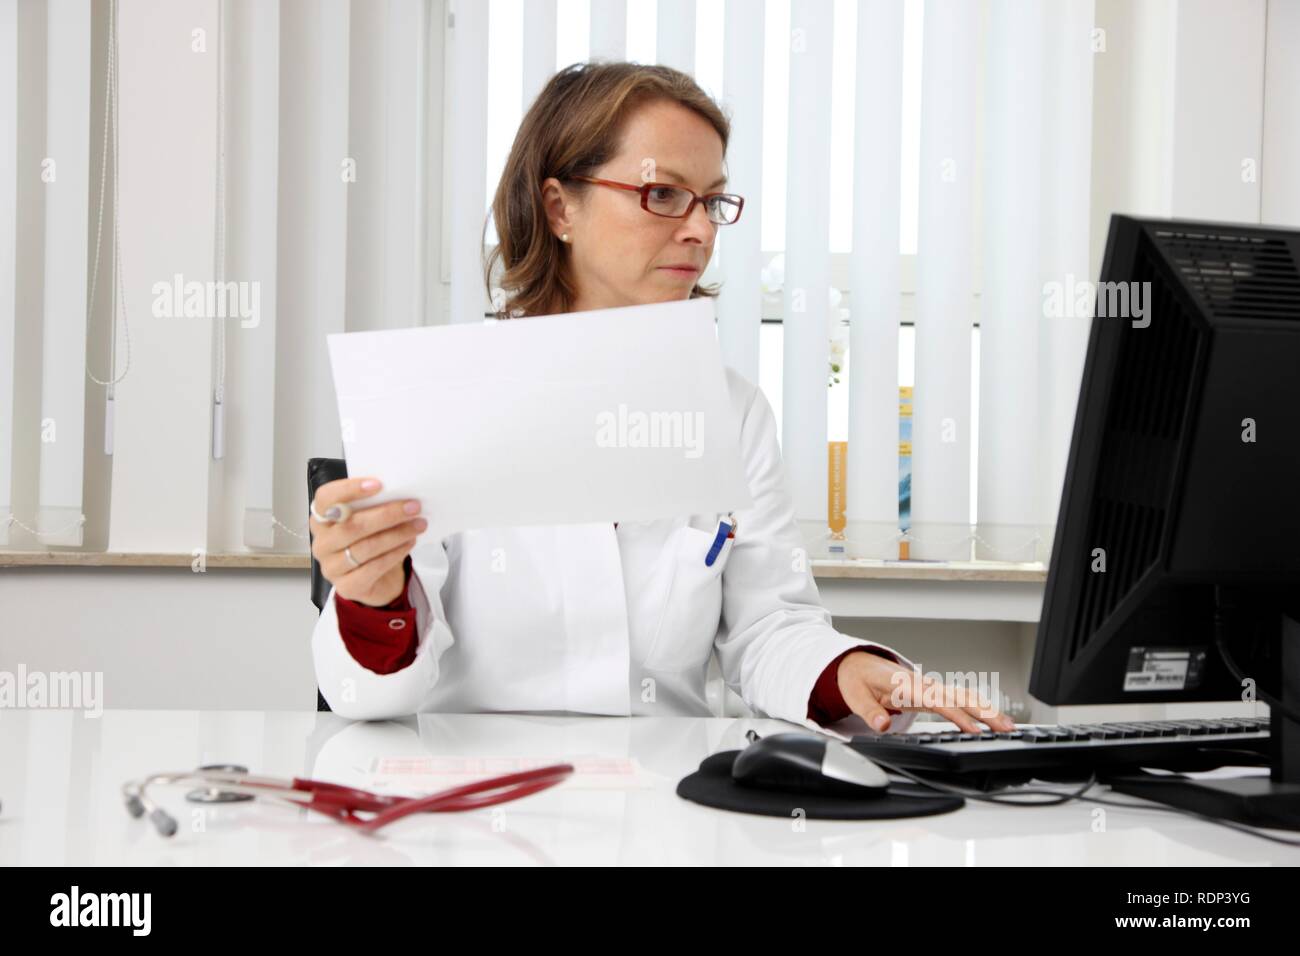 Medical practice, doctor examining the health records of a patient at her desk Stock Photo